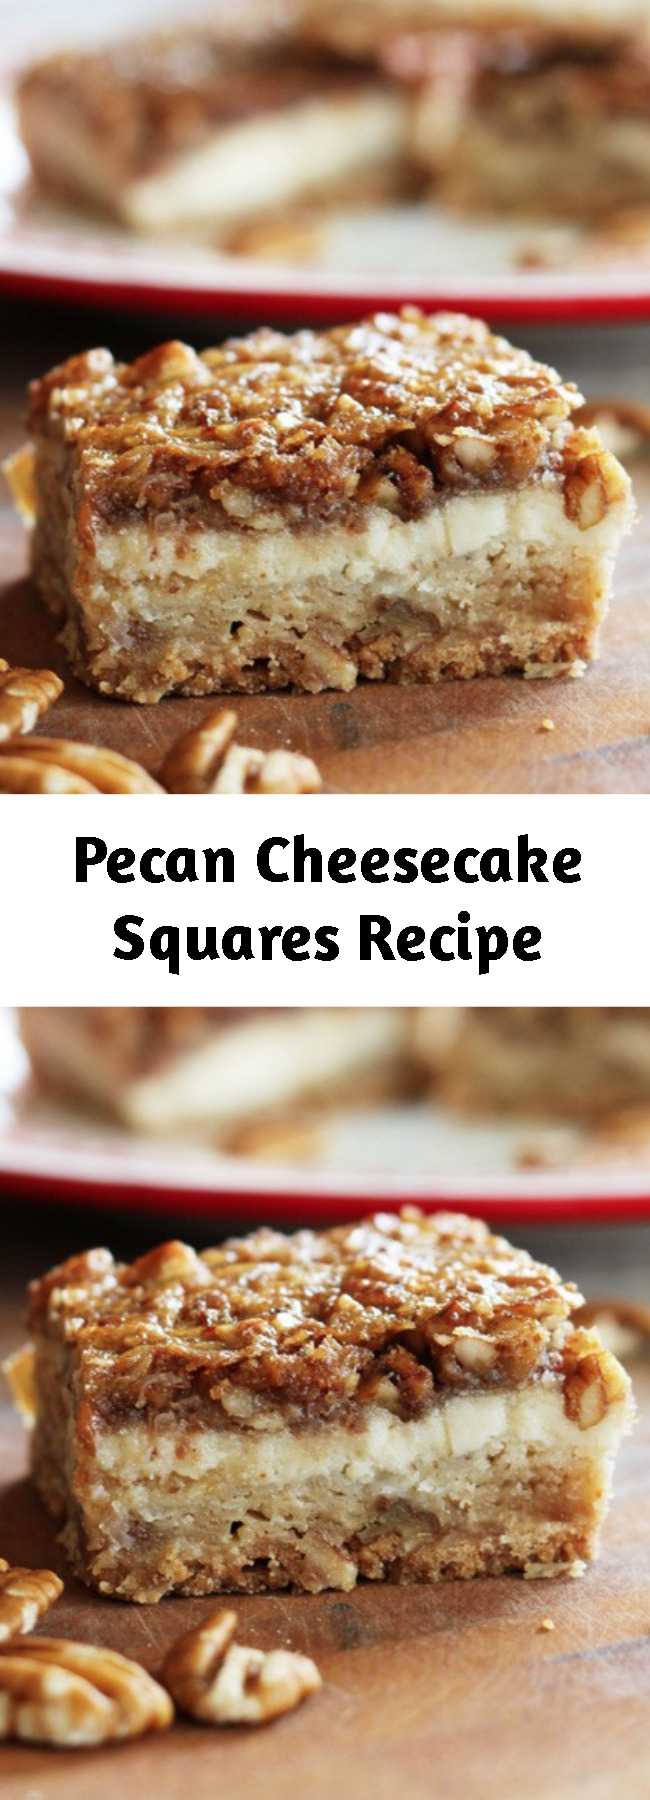 Pecan Cheesecake Squares Recipe - Each square of this scrumptious dessert boasts a layer of shortbread, a layer of tangy cheesecake, and a crunchy pecan pie layer in every bite!